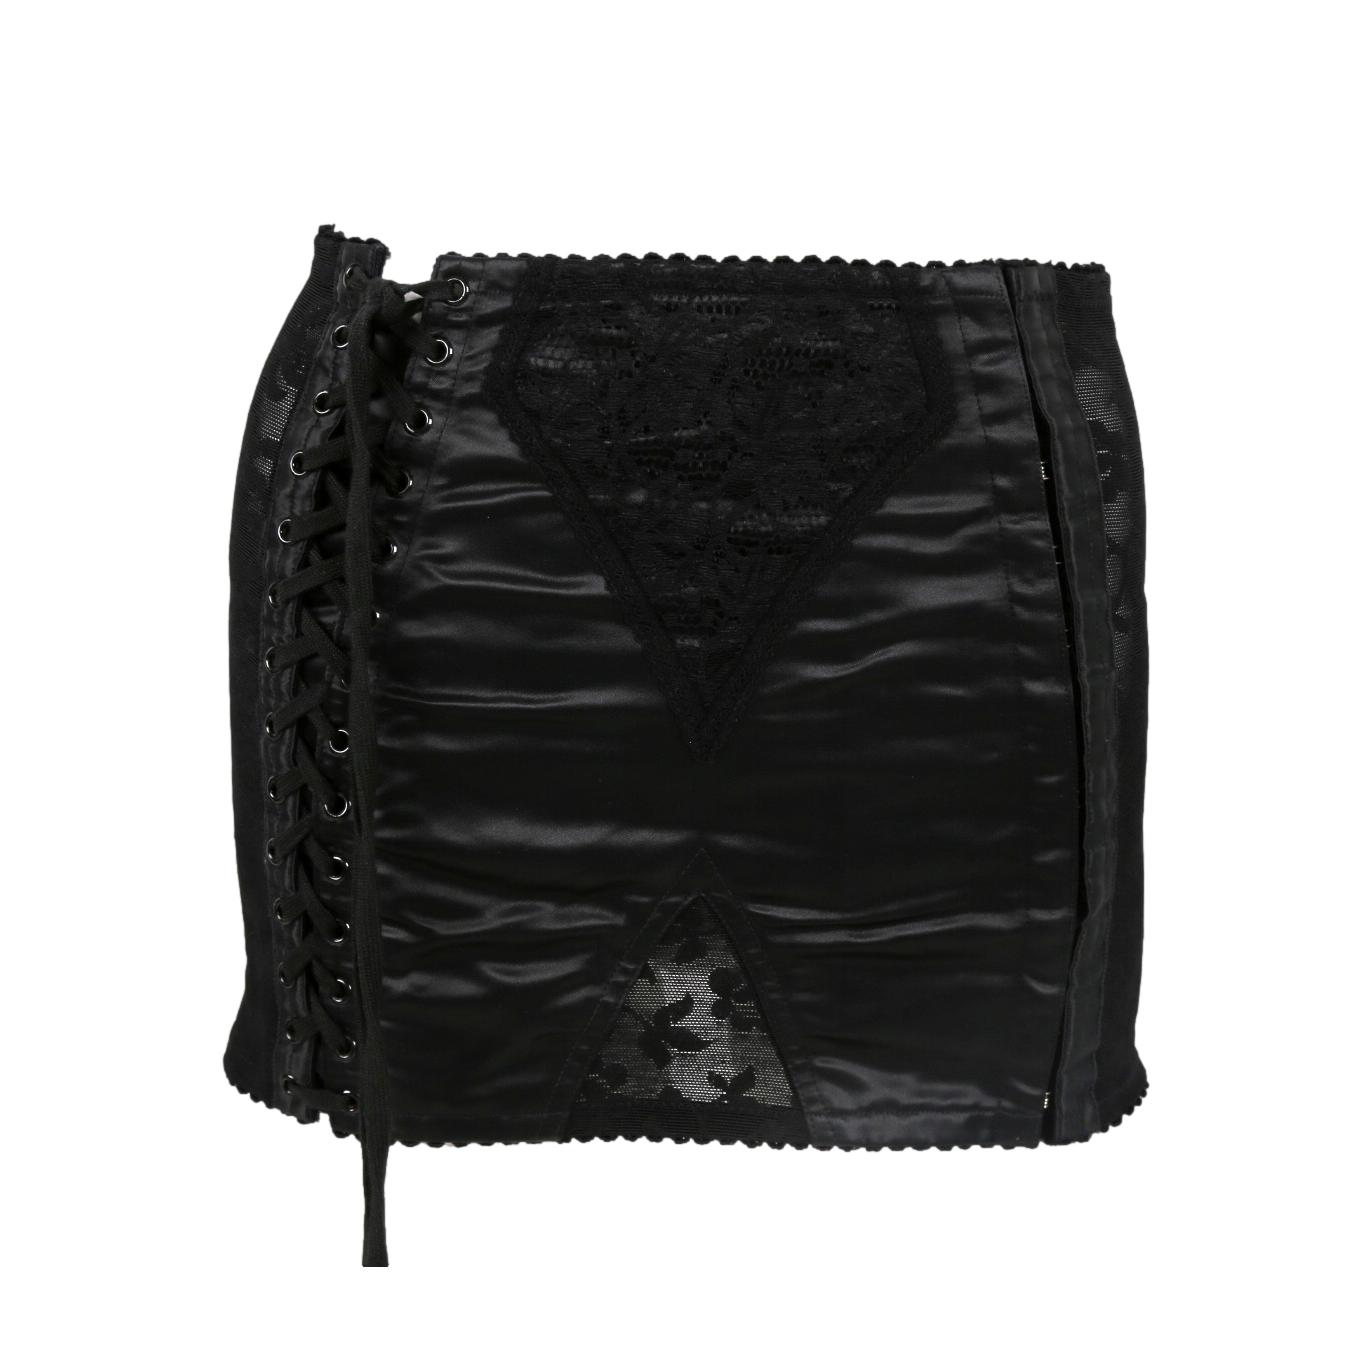 Dolce and Gabbana Black Floral Lace Skirt - Apparel